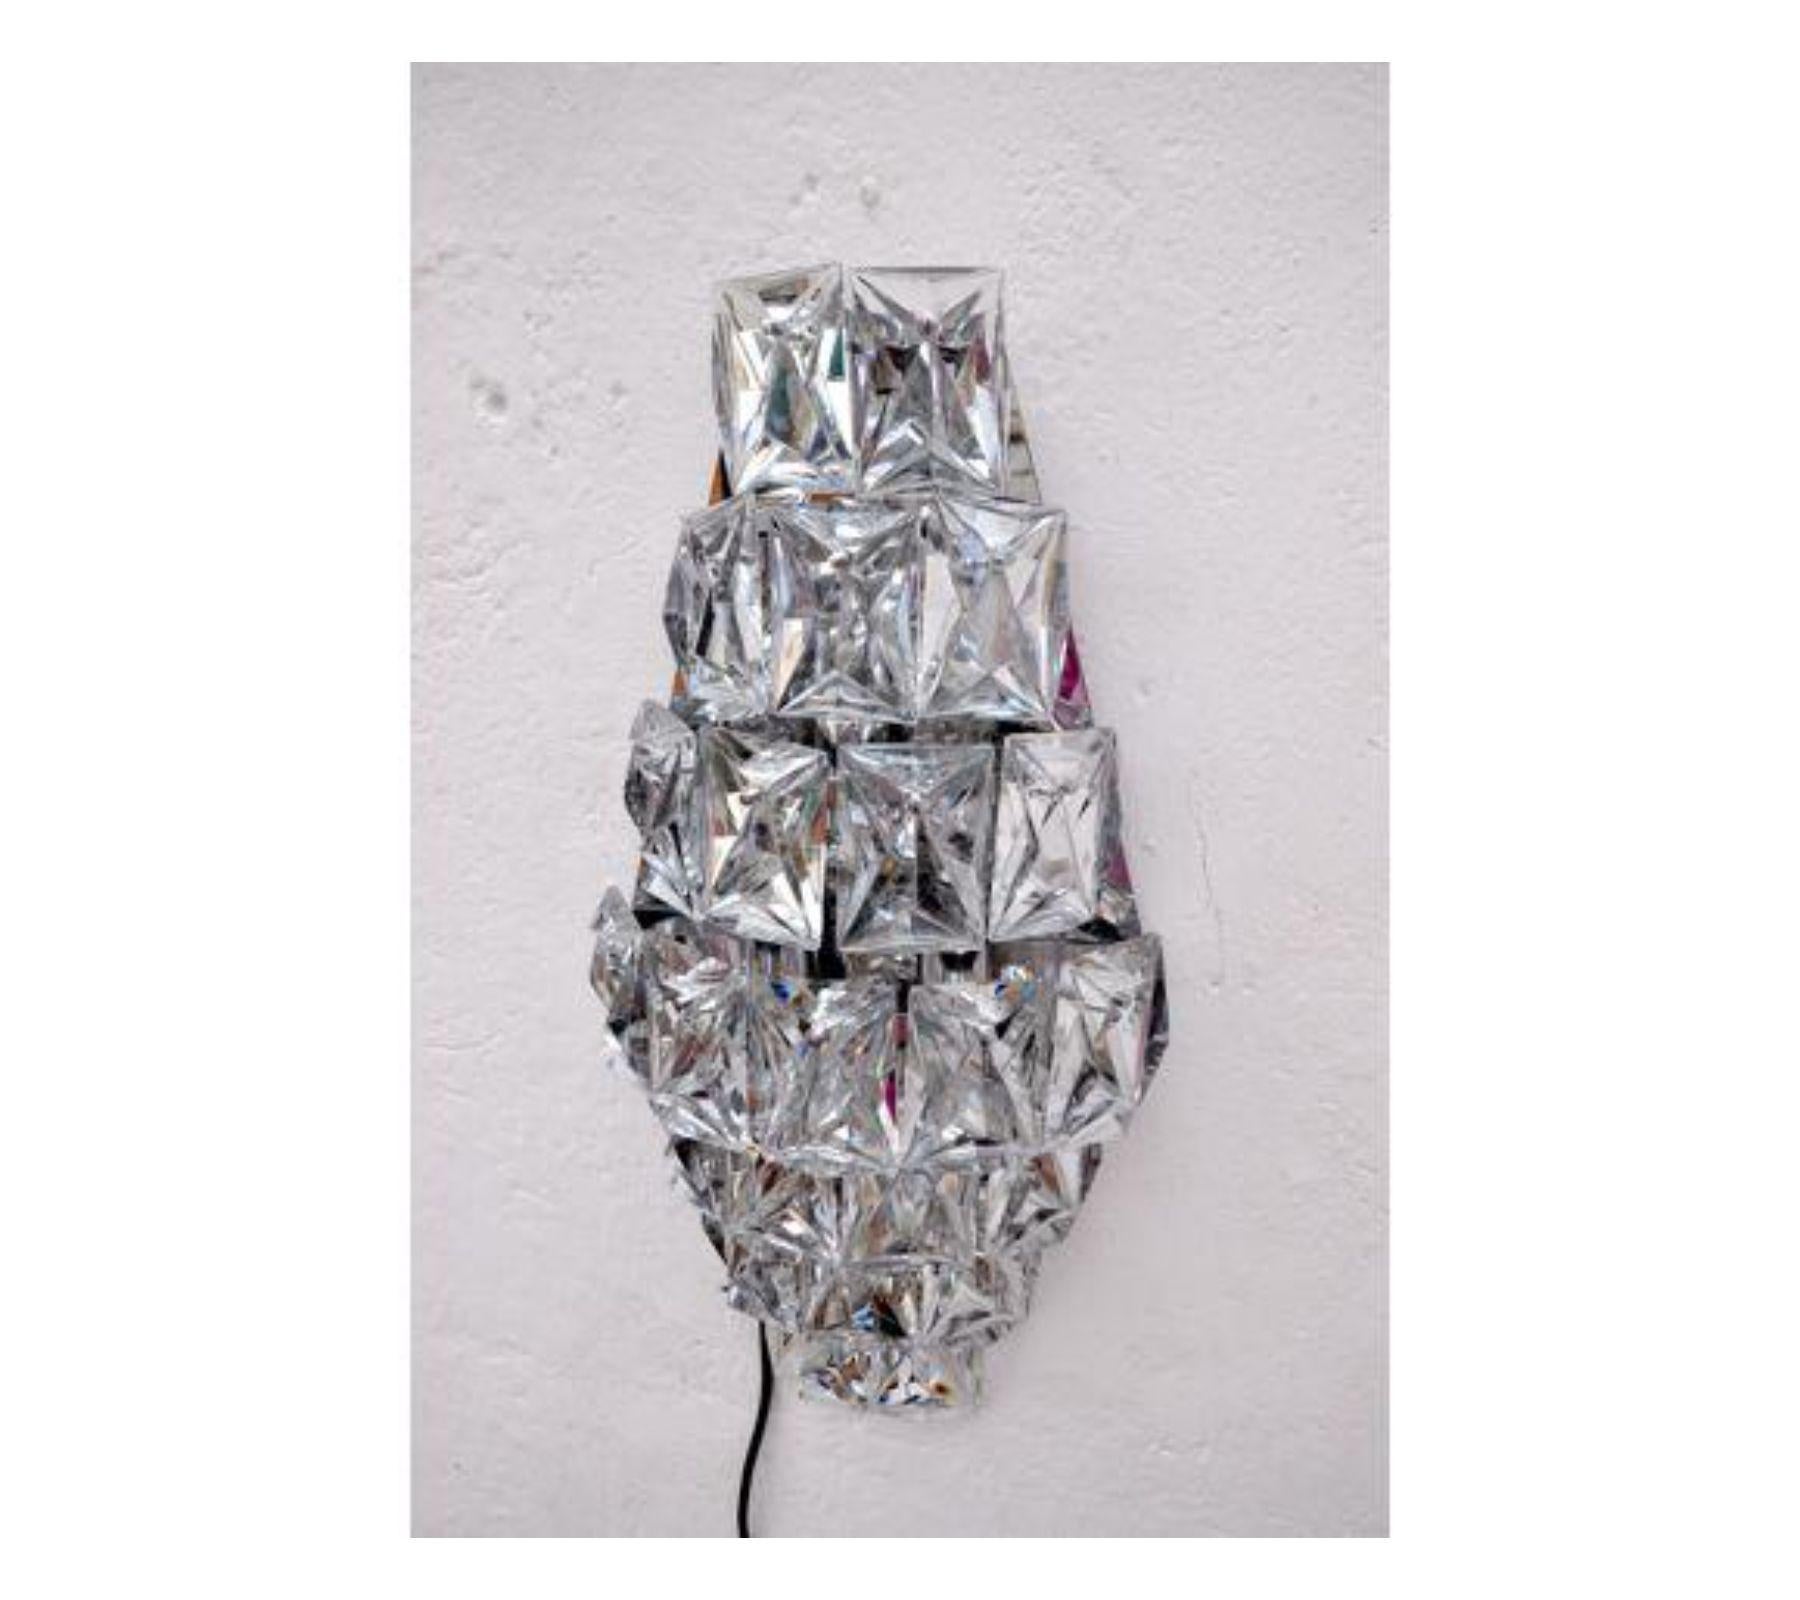 Impressive kinkeldey wall sconce designed and produced in Germany circa 1970s. Metallic silver platted Structure with 7 levels and 23 crystals. A unique piece of design that will be great highlight in your interior project. Object in mint